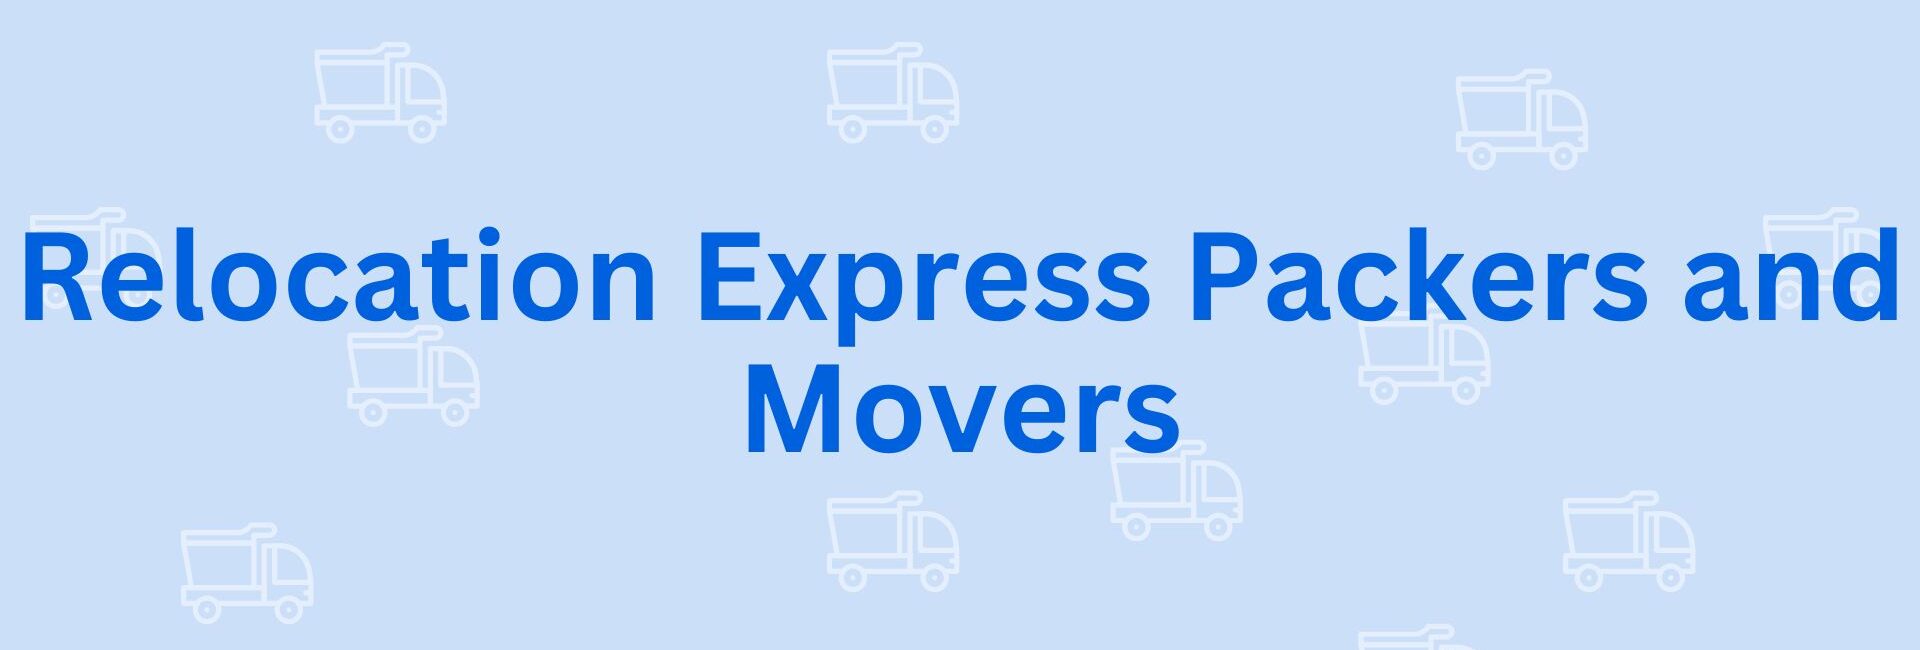 Relocation Express Packers and Movers - Packers and Movers in Noida